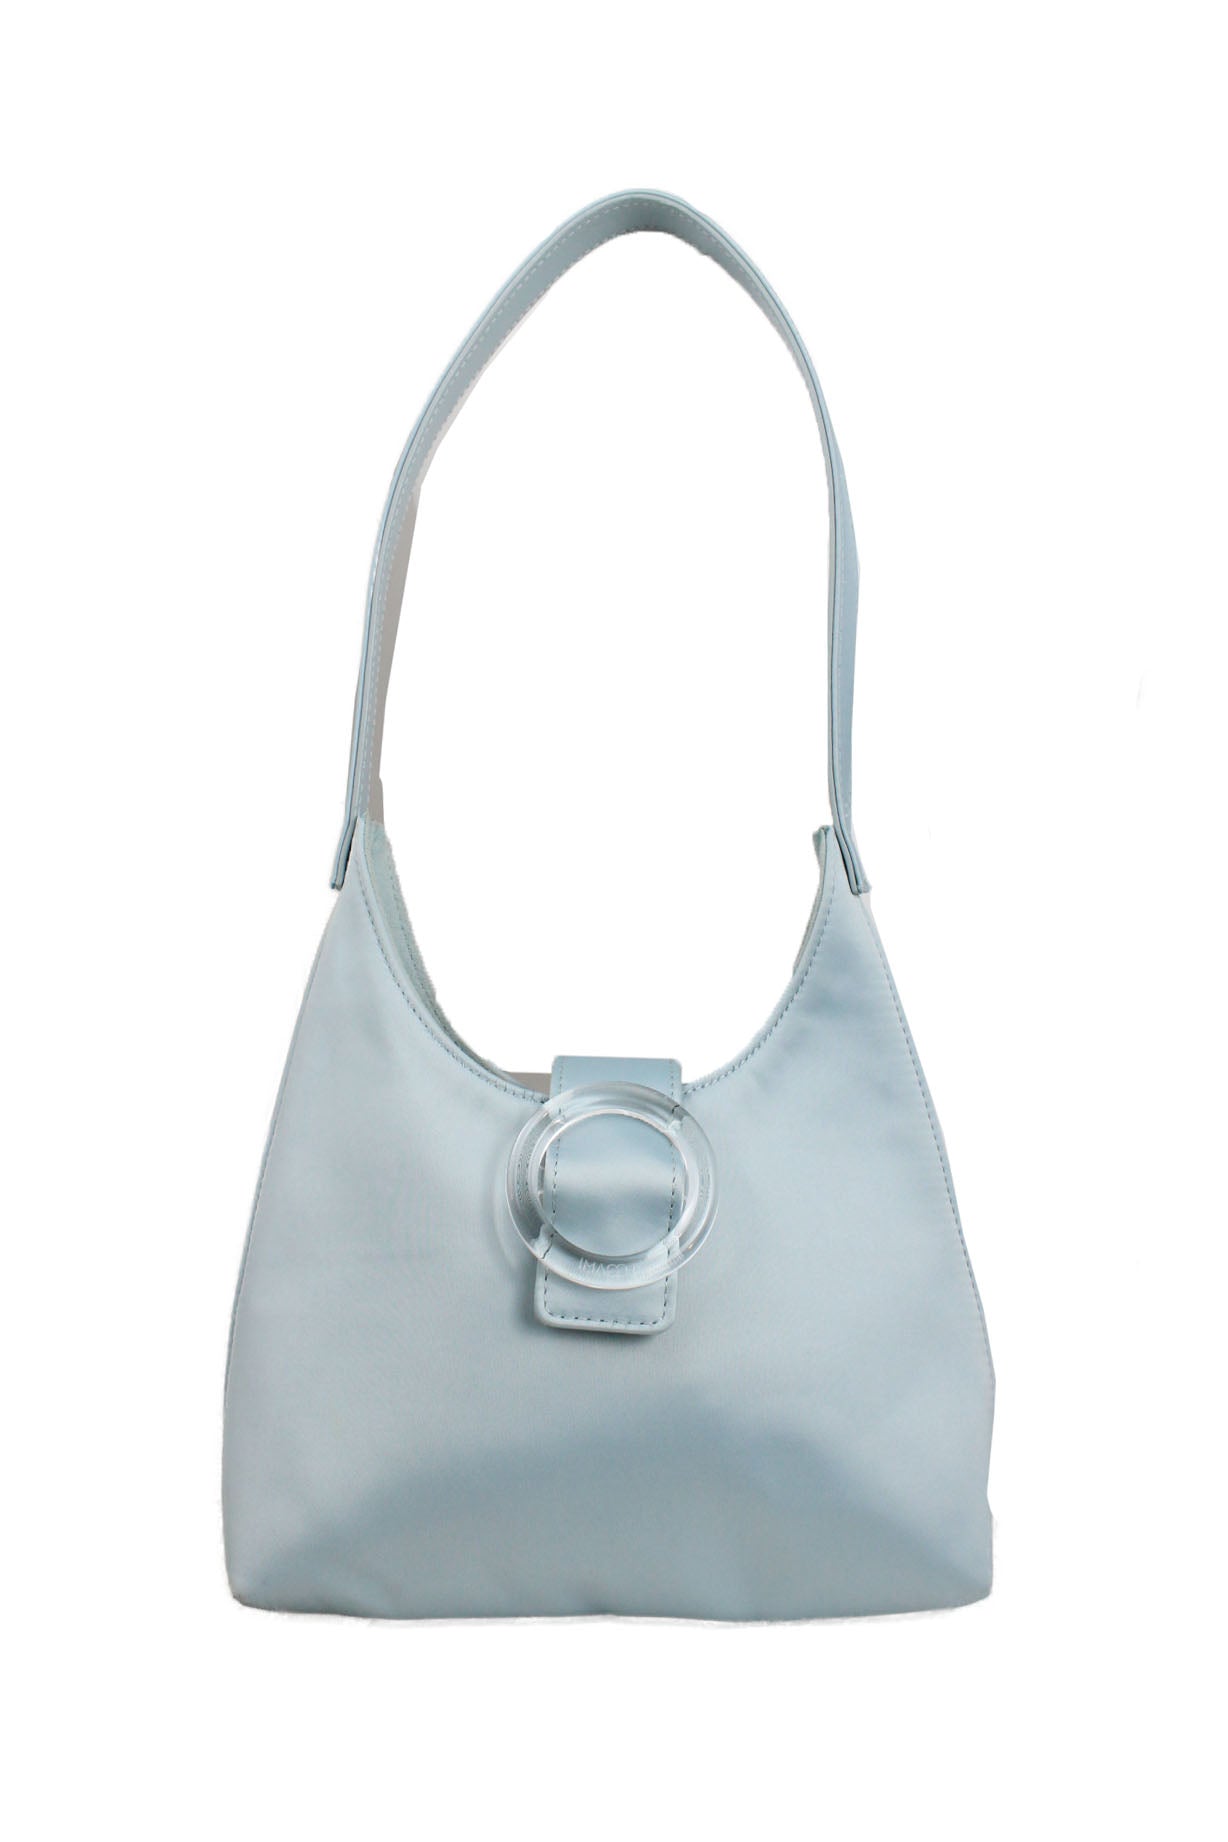 front of imagoa baby blue satin no 44 mini bag. rigid top strap. lucite buckle design with magnetic flap closure. faux suede lining. 